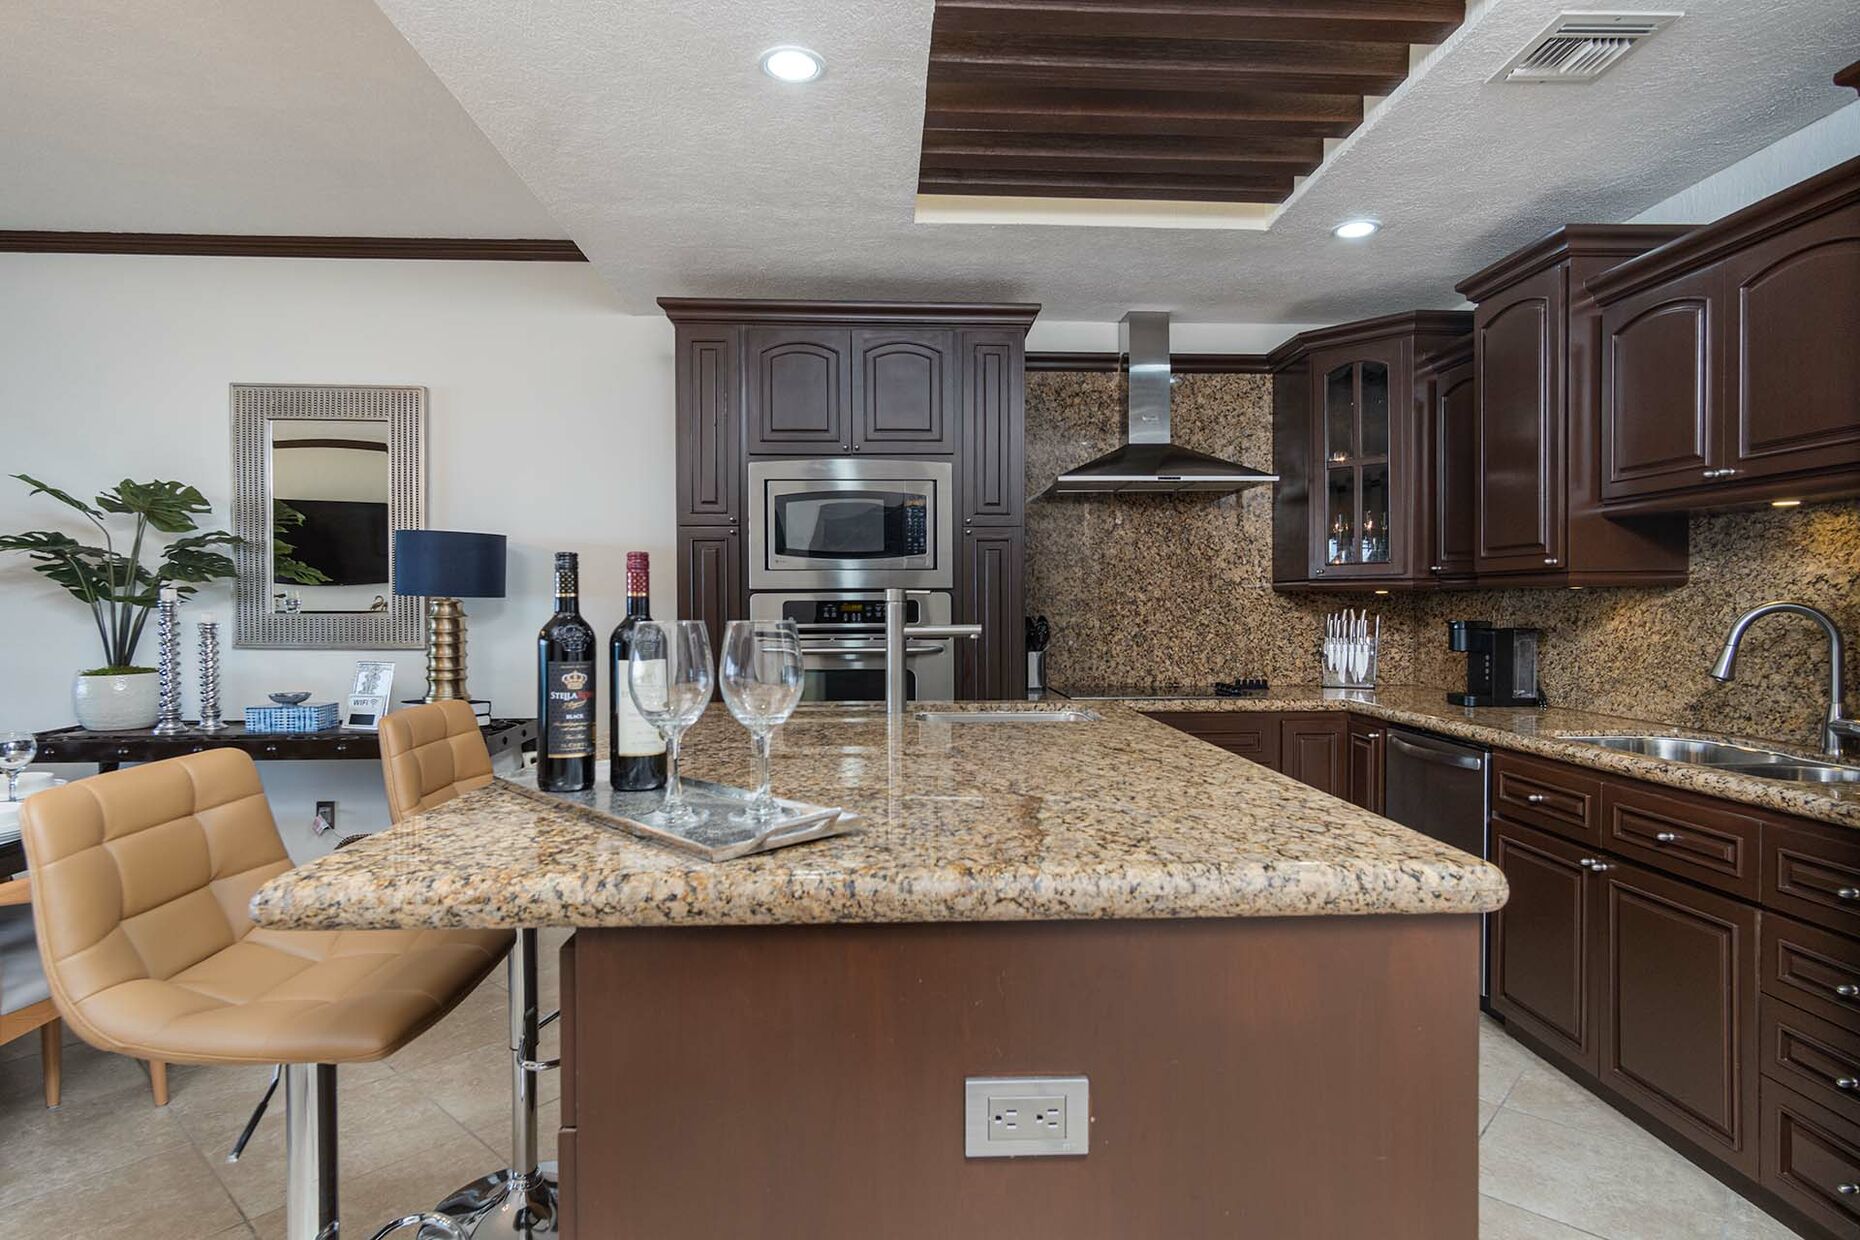 The kitchen with dark wood cabinets, modern appliances, and granite counter.